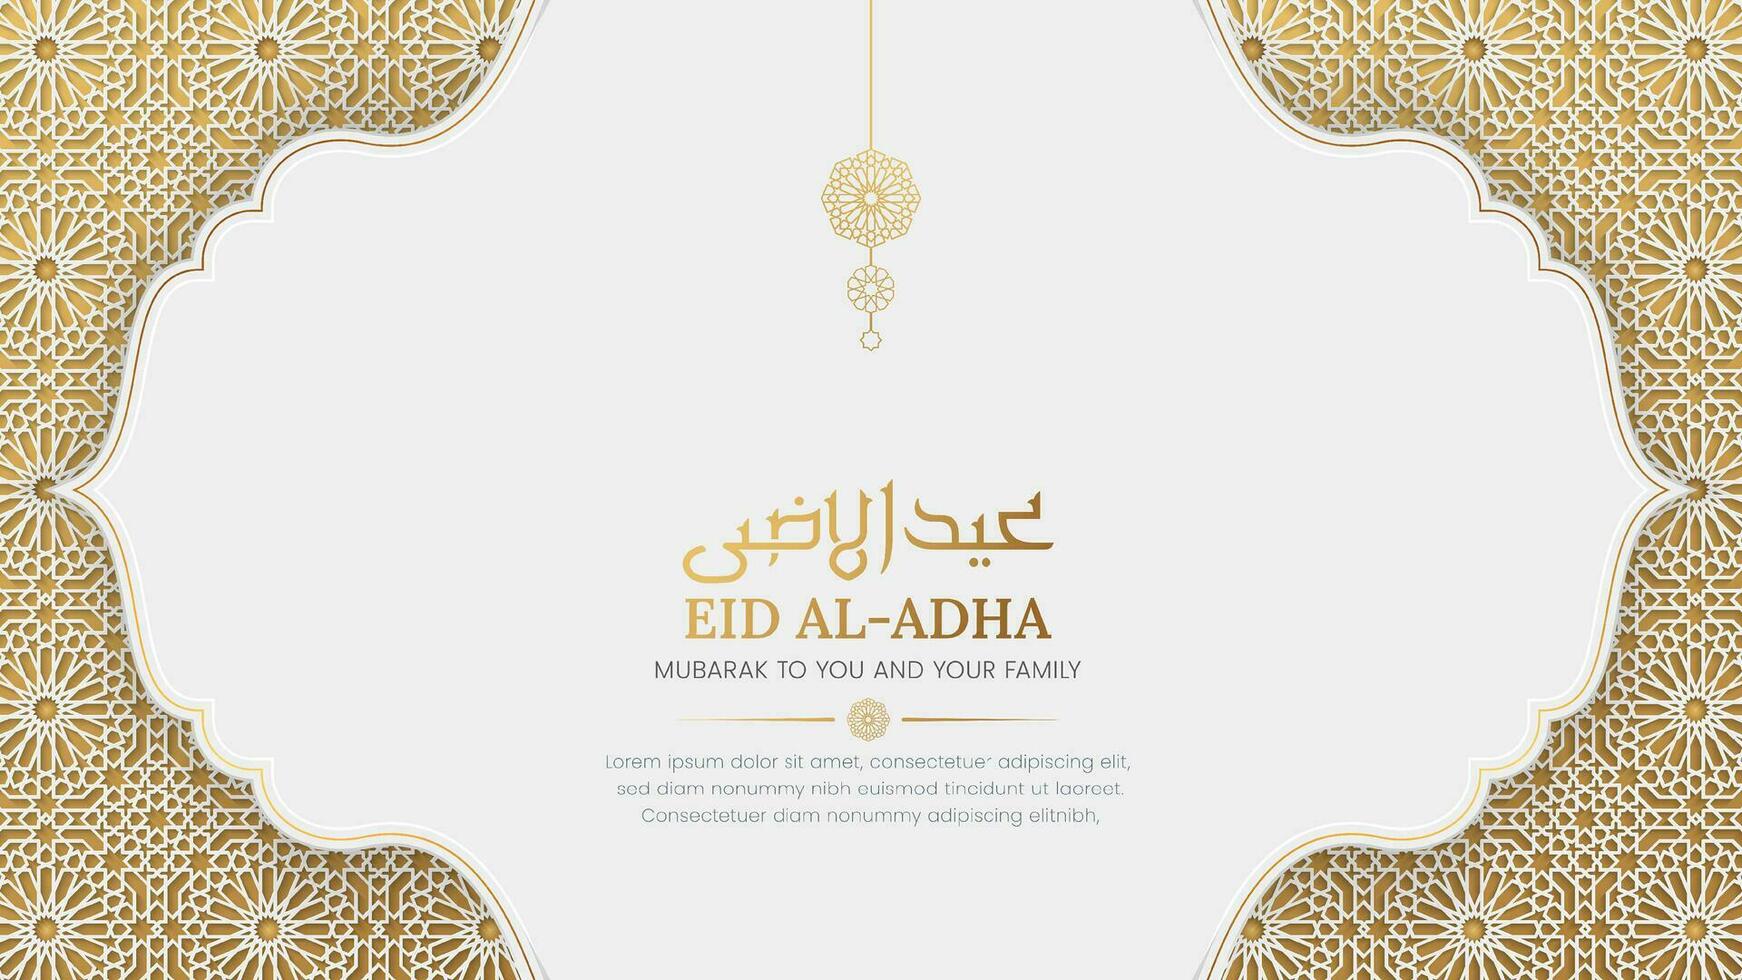 Eid Mubarak White and golden Islamic Background with Decorative Ornament Pattern vector